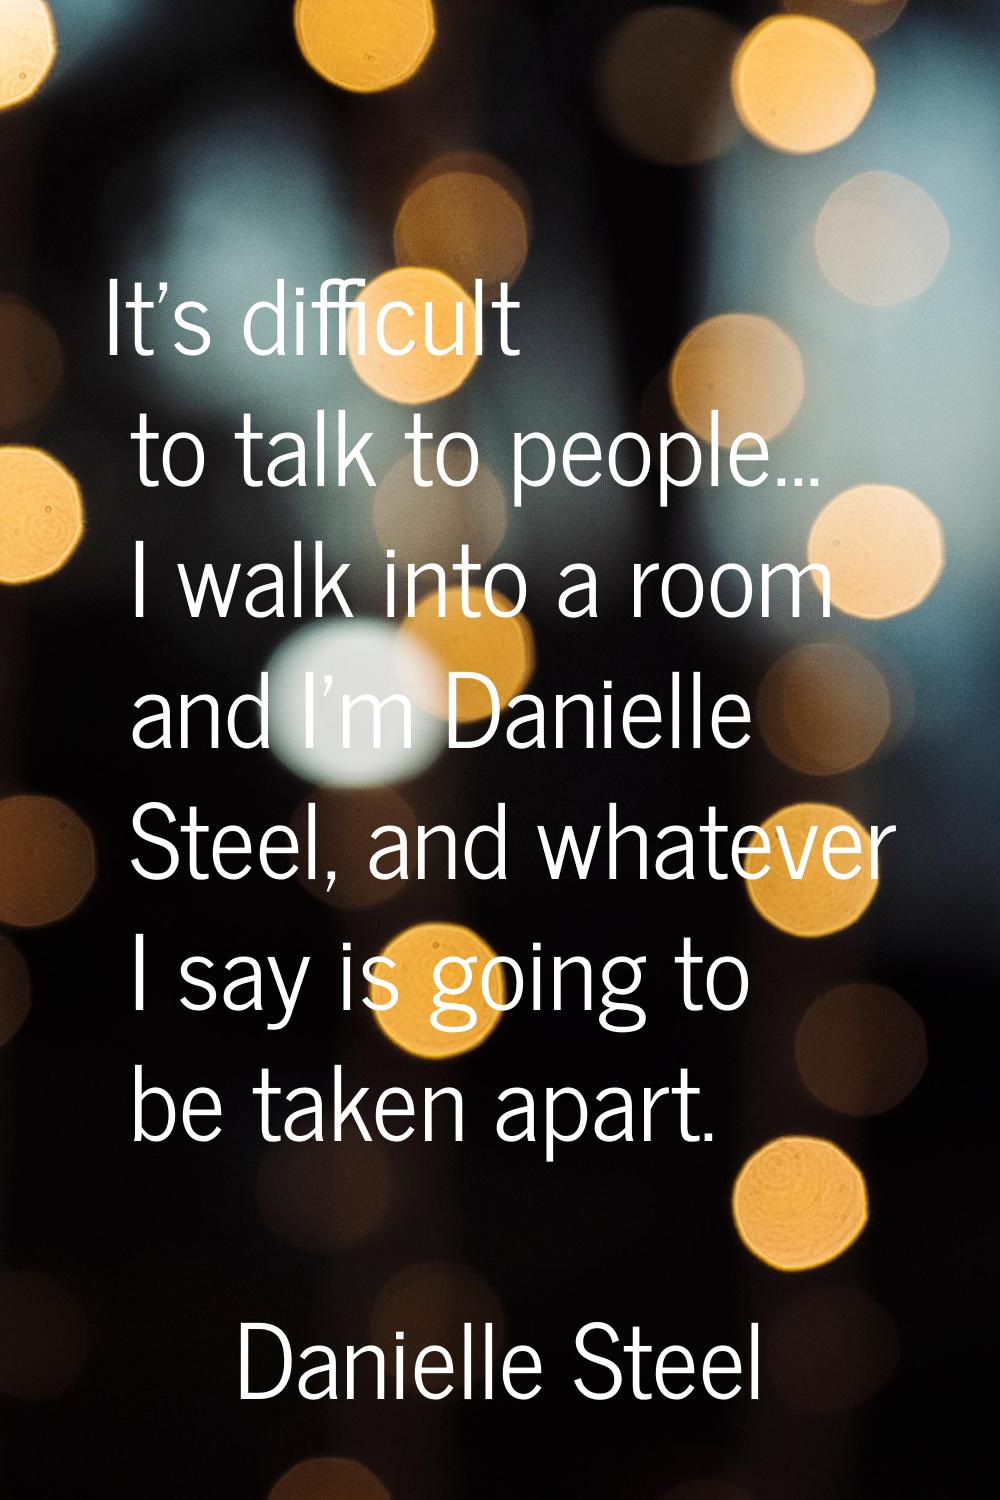 It's difficult to talk to people... I walk into a room and I'm Danielle Steel, and whatever I say i